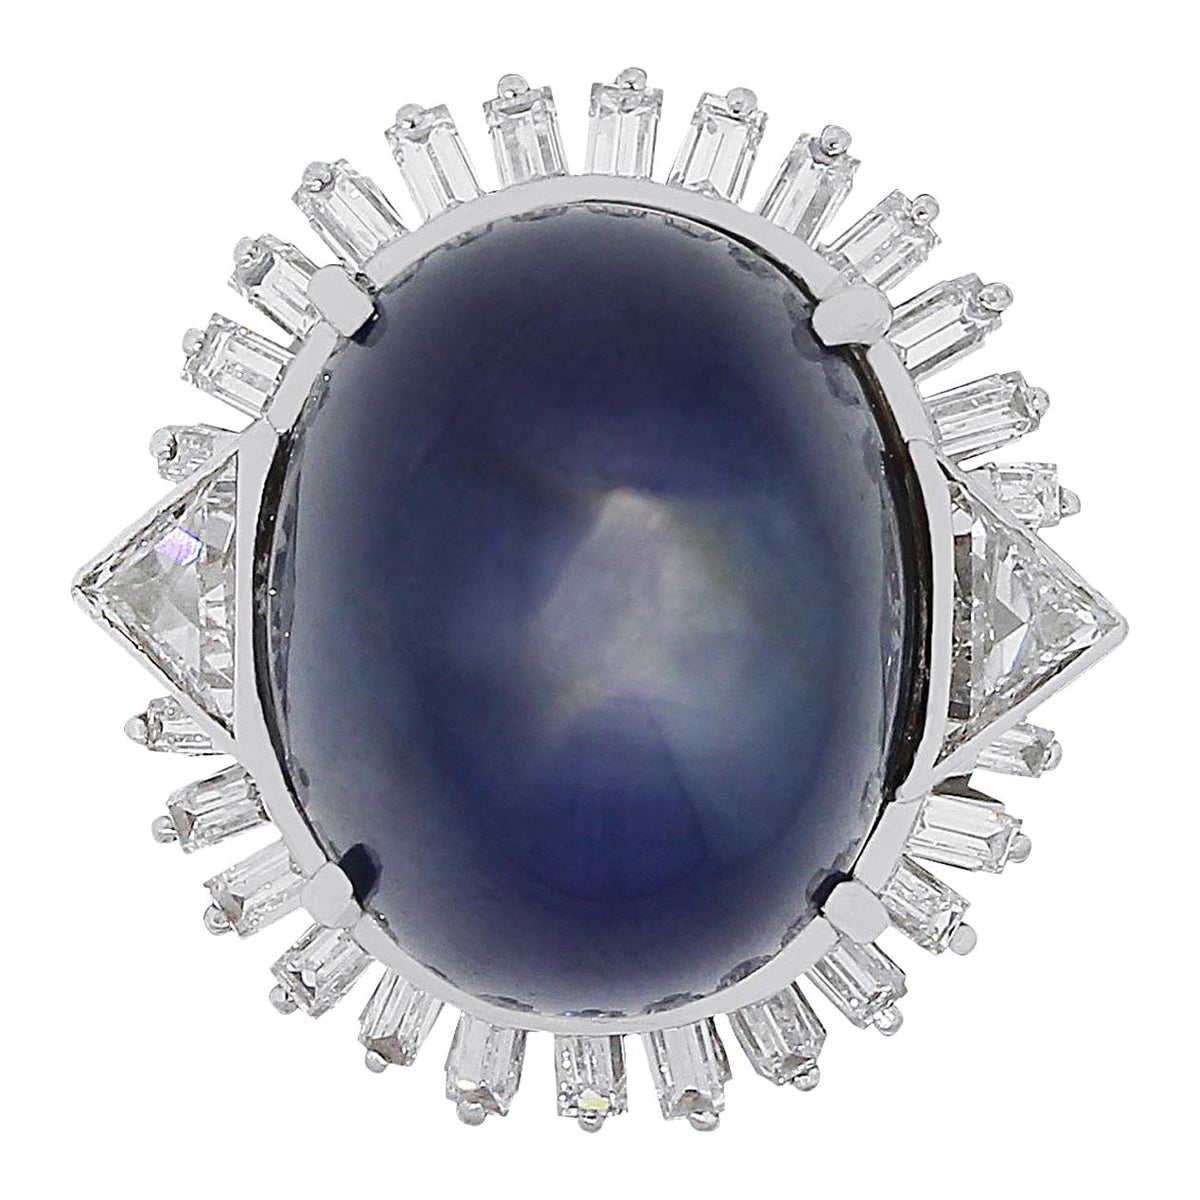 39.08 Carat Star Sapphire Ring For Sale